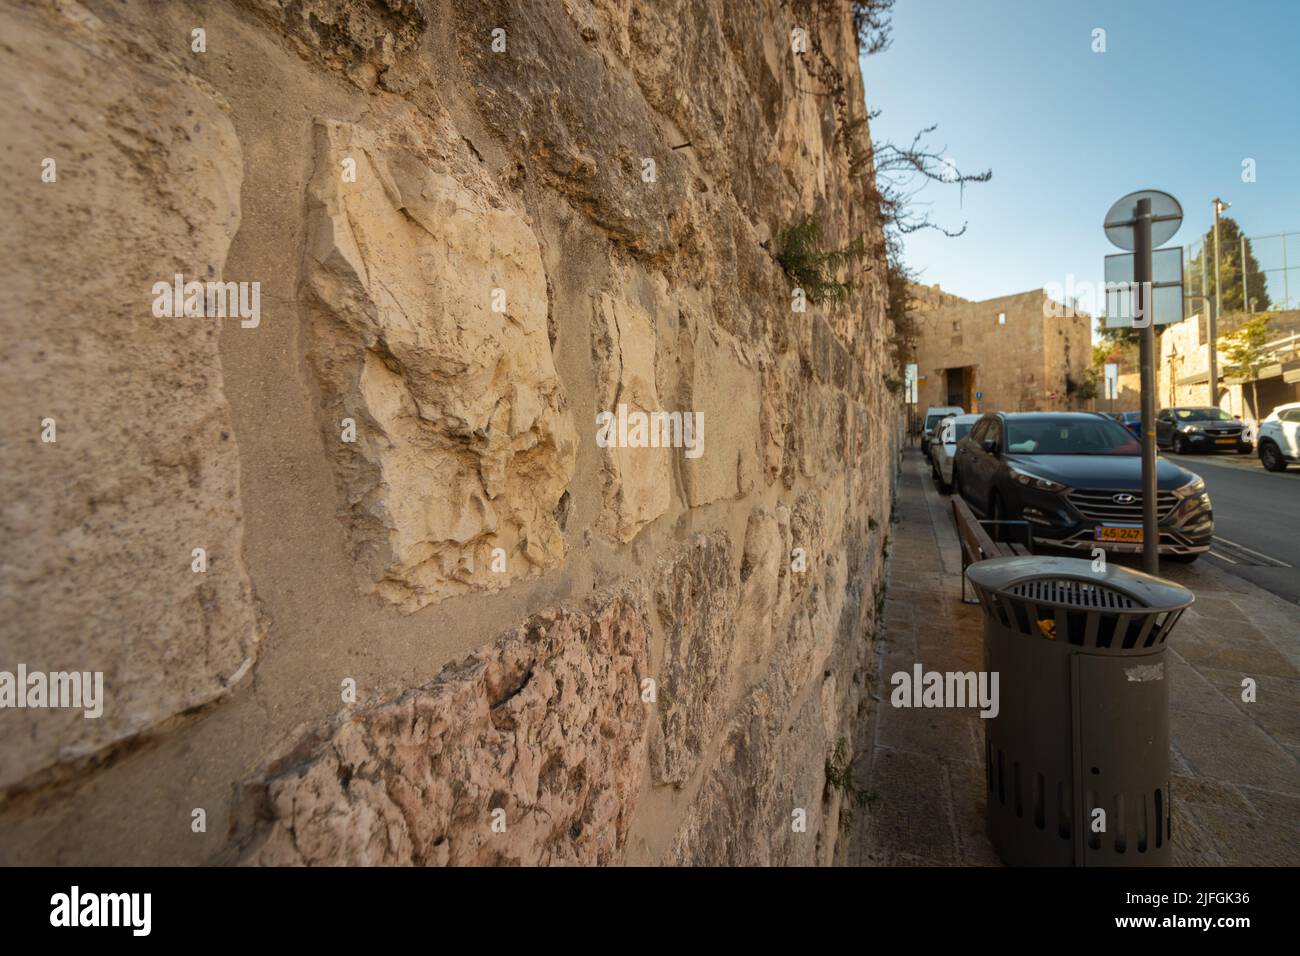 23-11-2021. jerusalem-israel. The famous walls of the Old City in the Jewish Quarter of Jerusalem Stock Photo